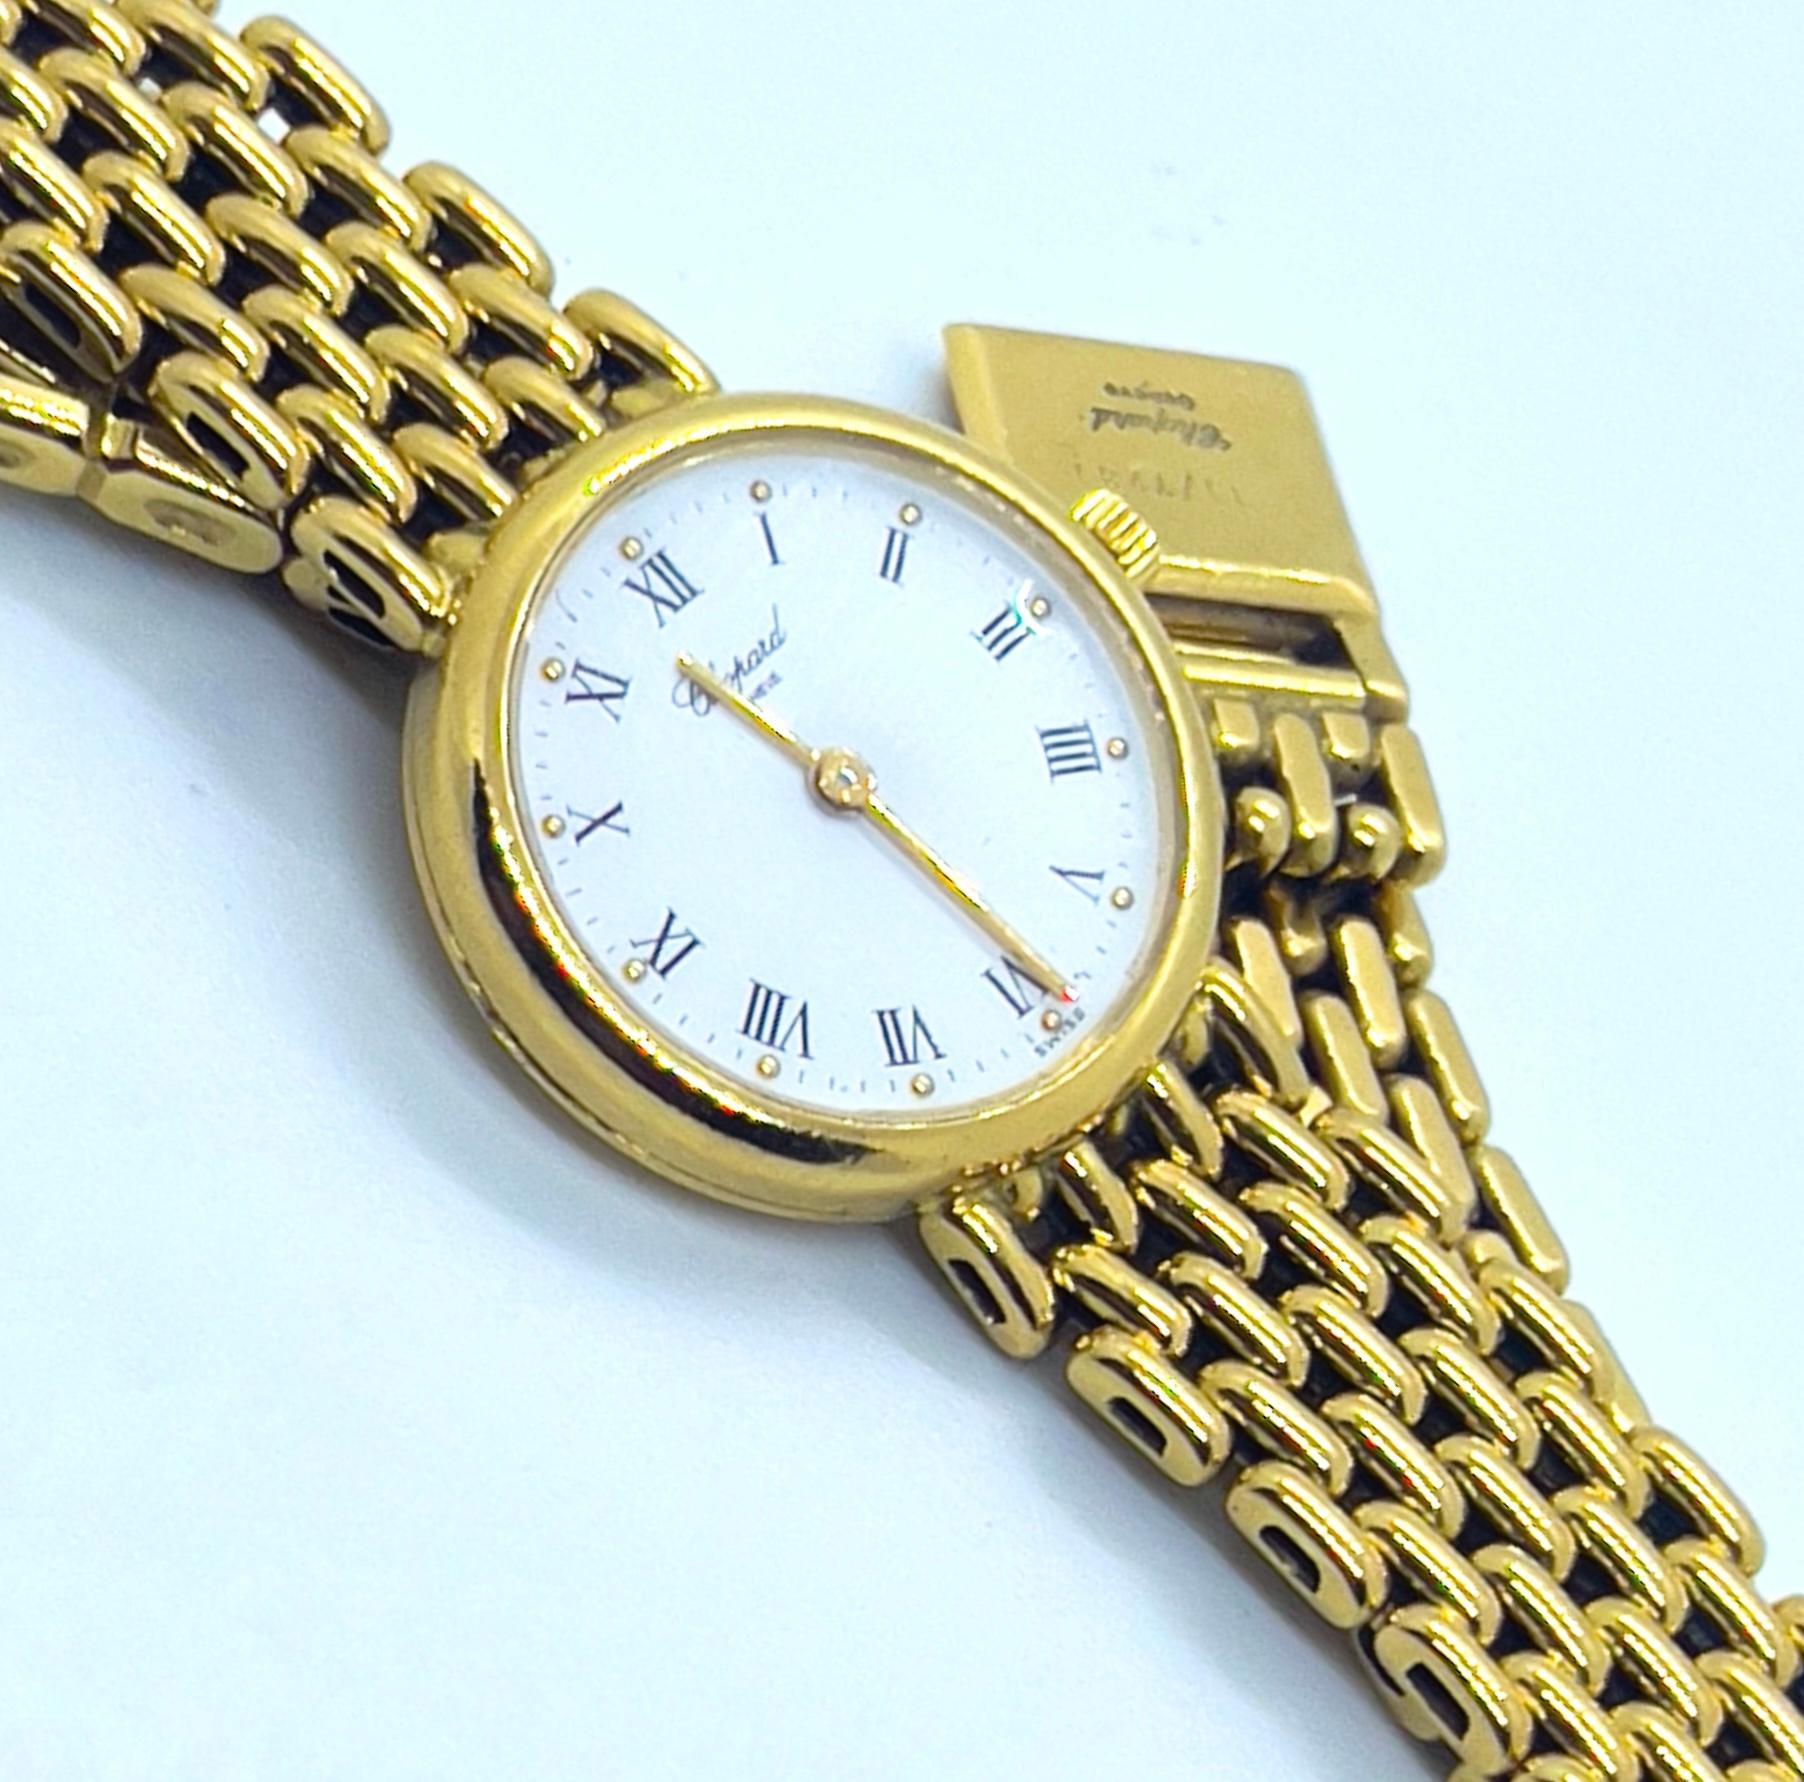 Timeless  classic from Chopard. Lady's watch in 18K yellow gold: reference number is 11/7281, CIRCA  1980. 
Serial  number: 453028 855
Total weight:44.5 grams
Total length: 18 cm